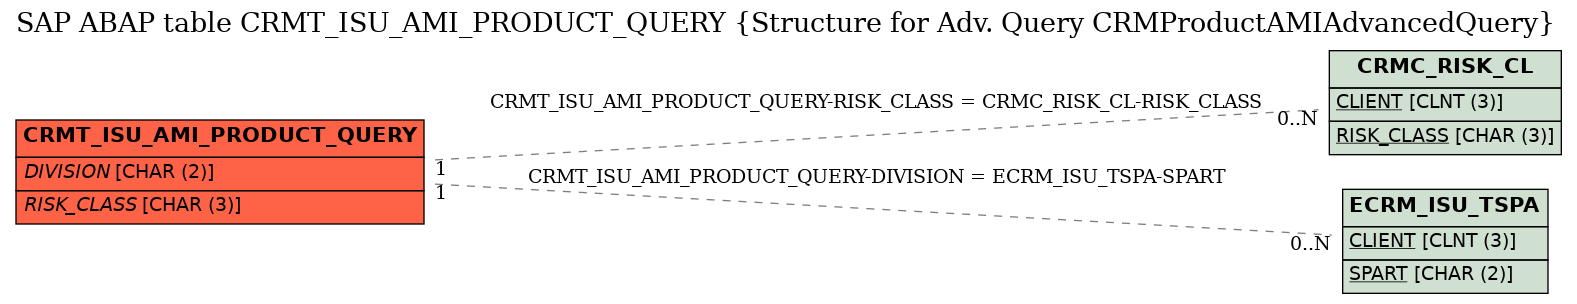 E-R Diagram for table CRMT_ISU_AMI_PRODUCT_QUERY (Structure for Adv. Query CRMProductAMIAdvancedQuery)